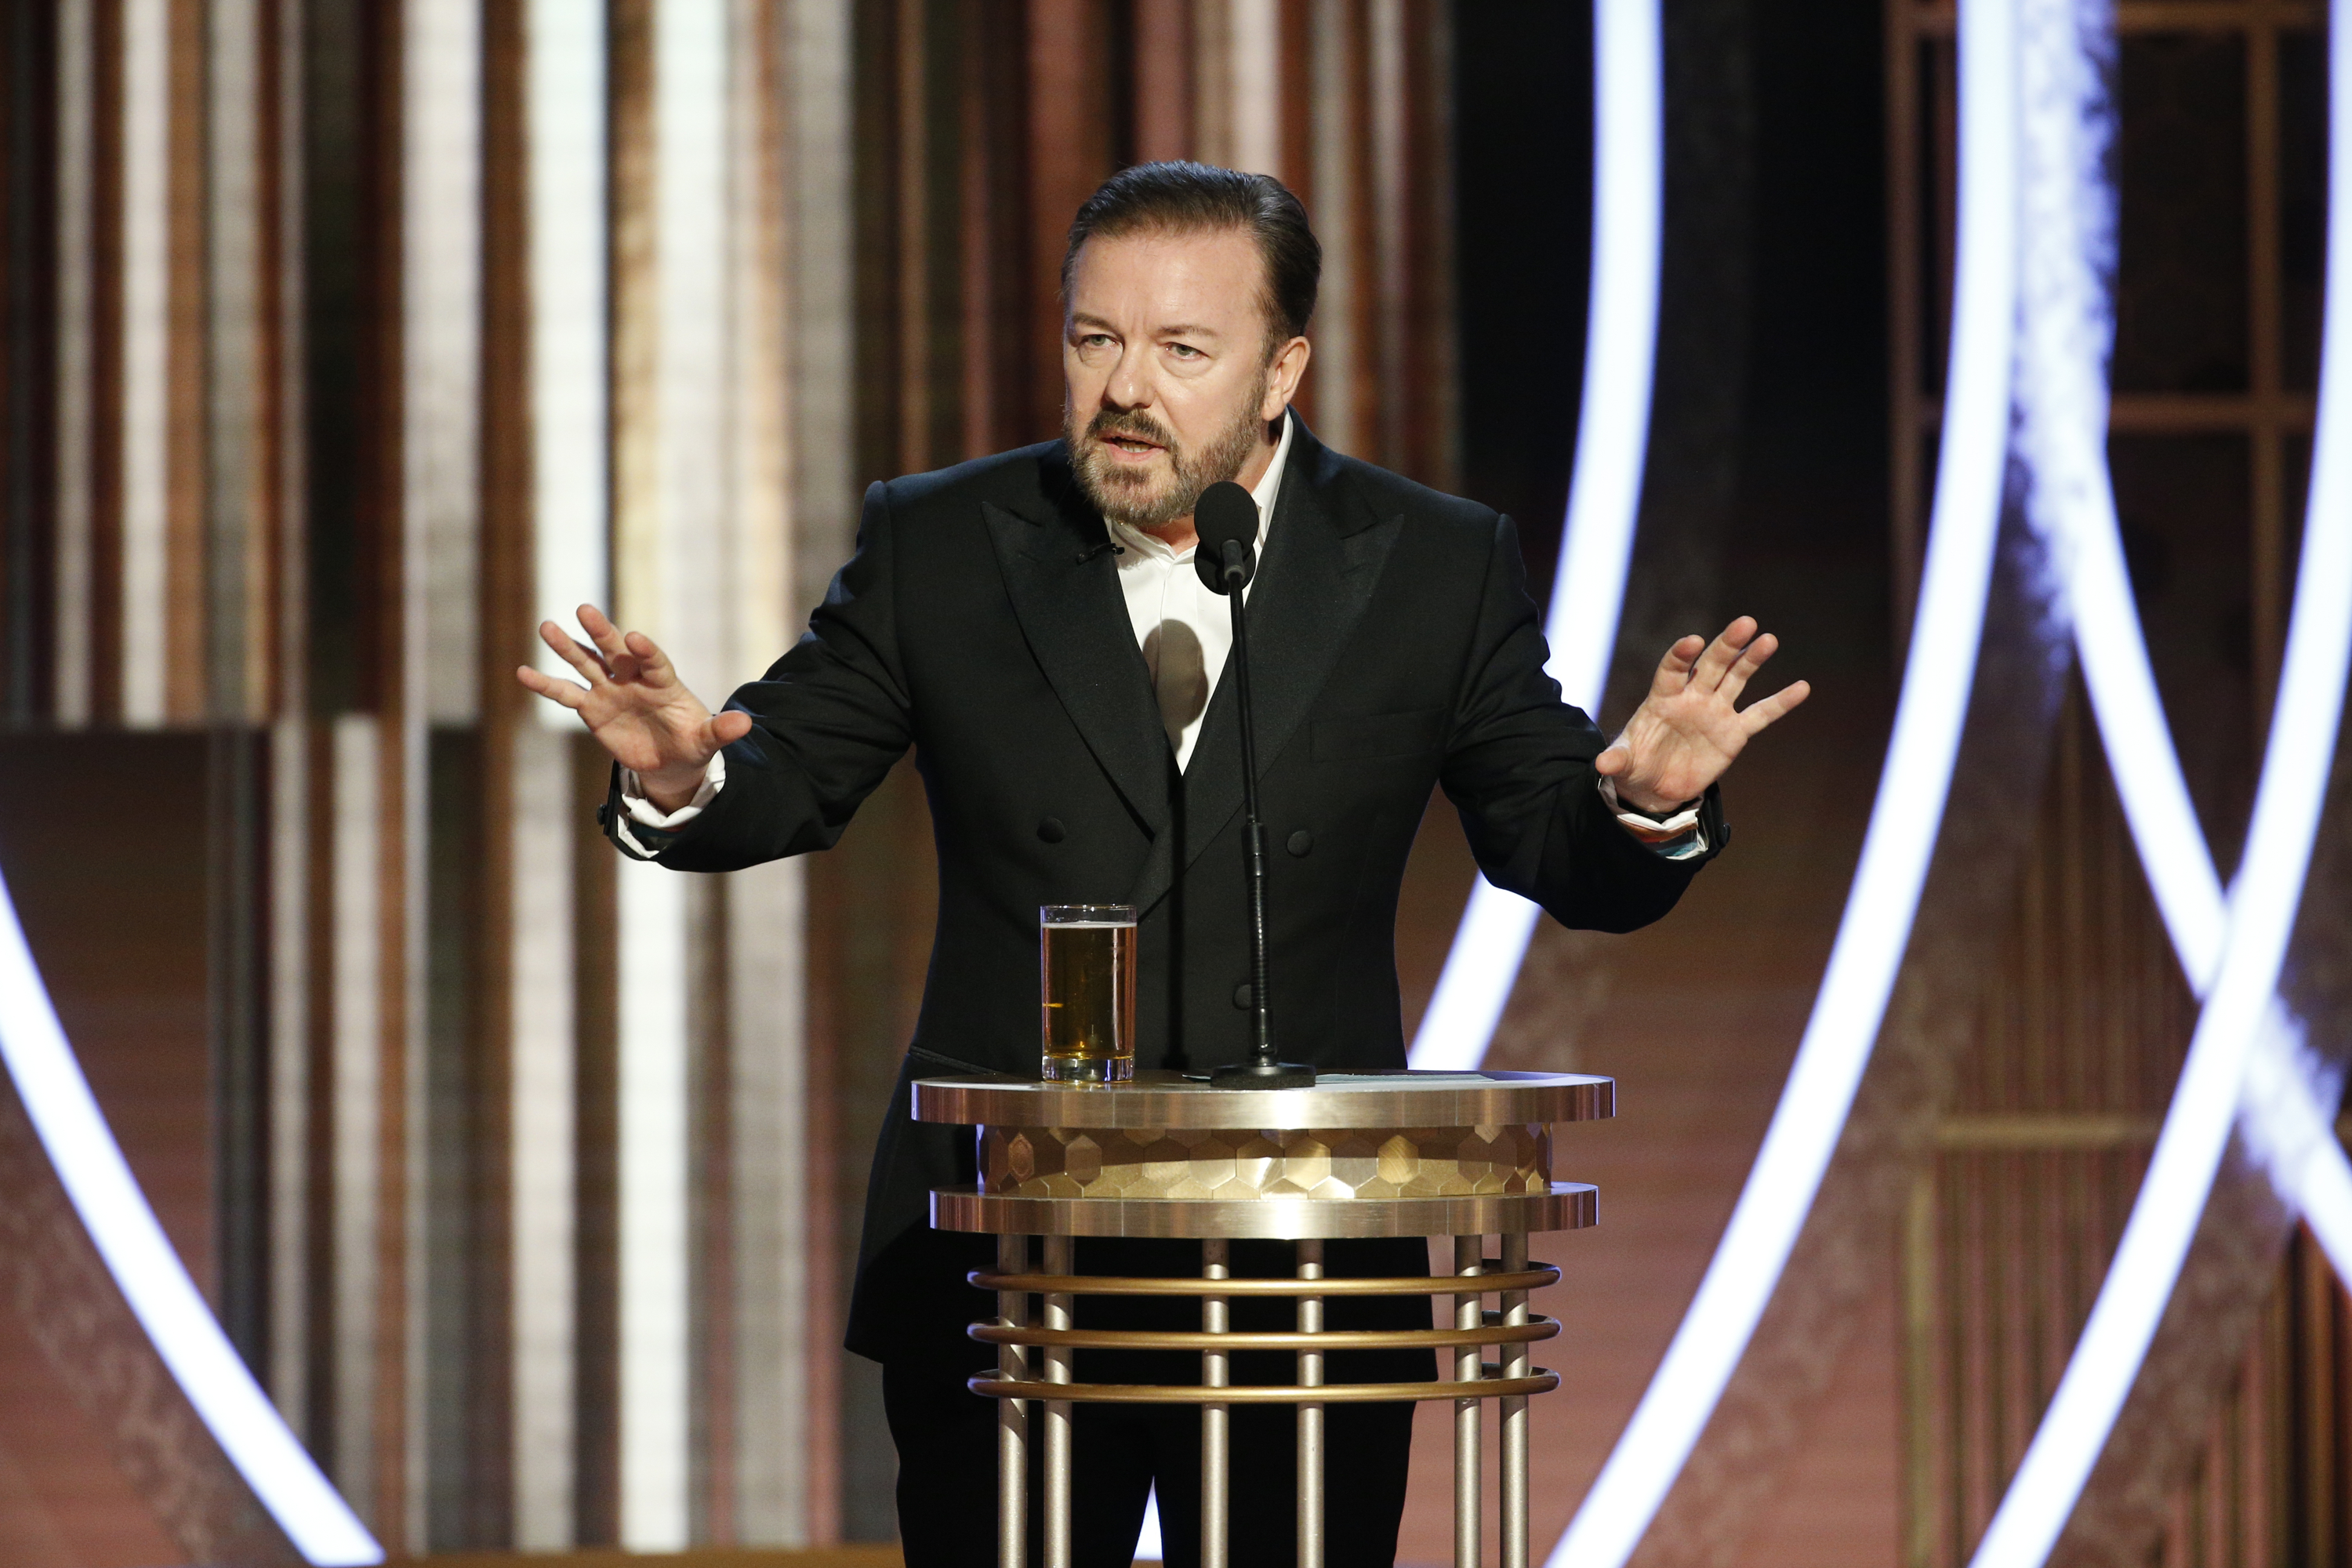 Host Ricky Gervais speaks onstage during the 77th Annual Golden Globe Awards. (Paul Drinkwater—NBCUniversal Media/Getty Images)